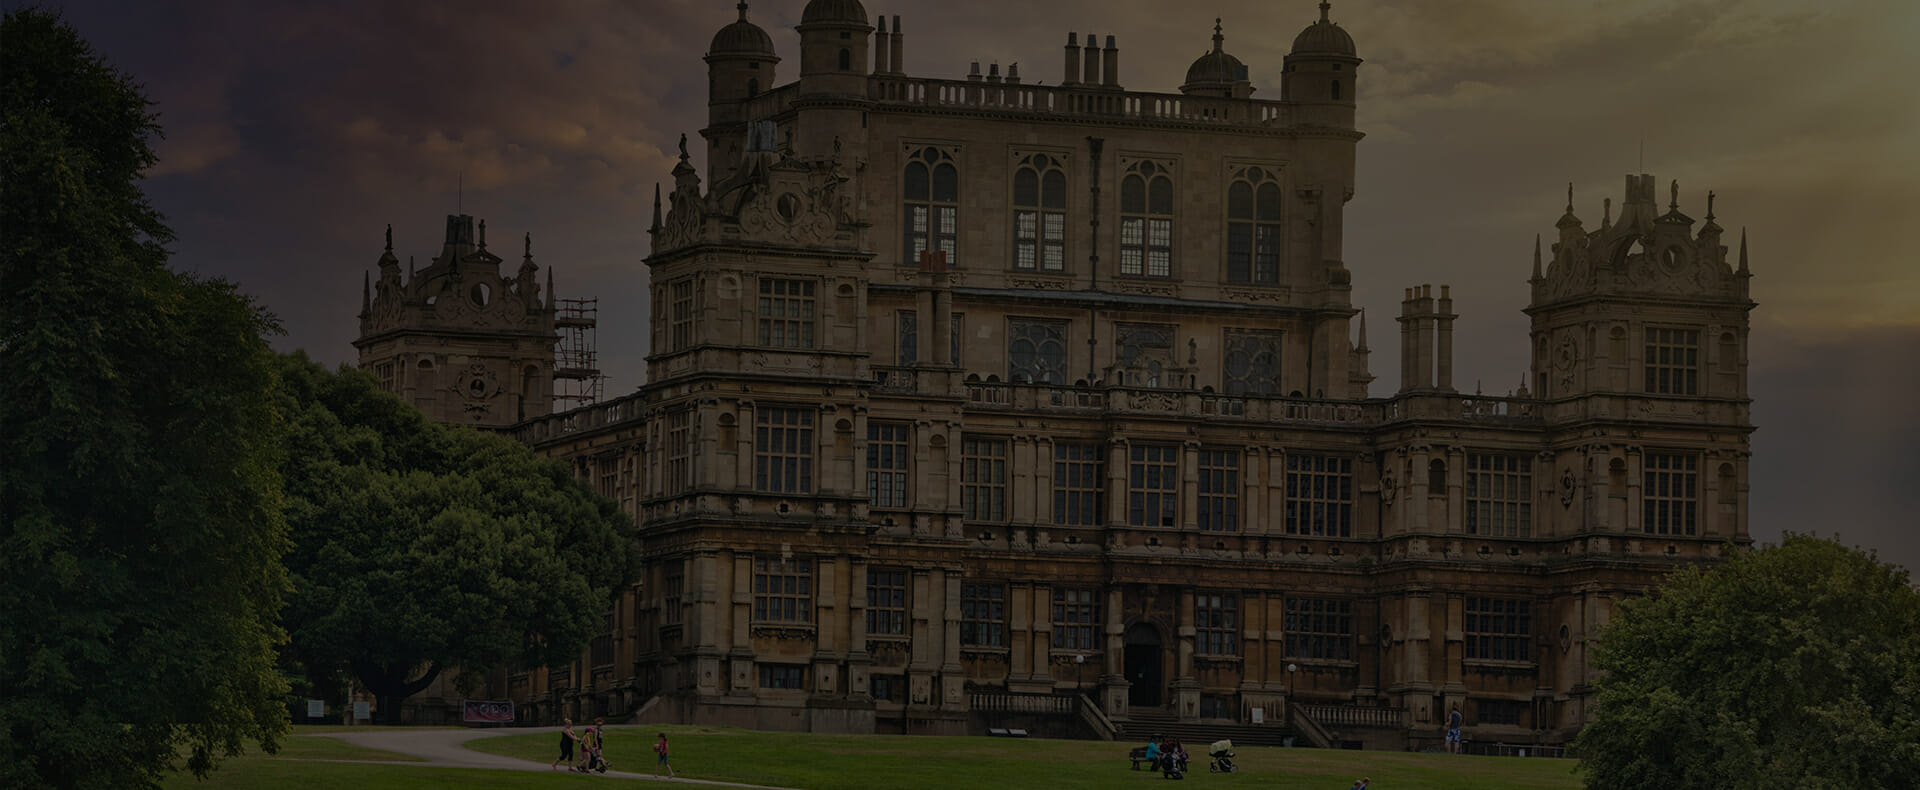 a grand and old building, wollaton hall in nottingham surrounded by grounds and trees with people walking